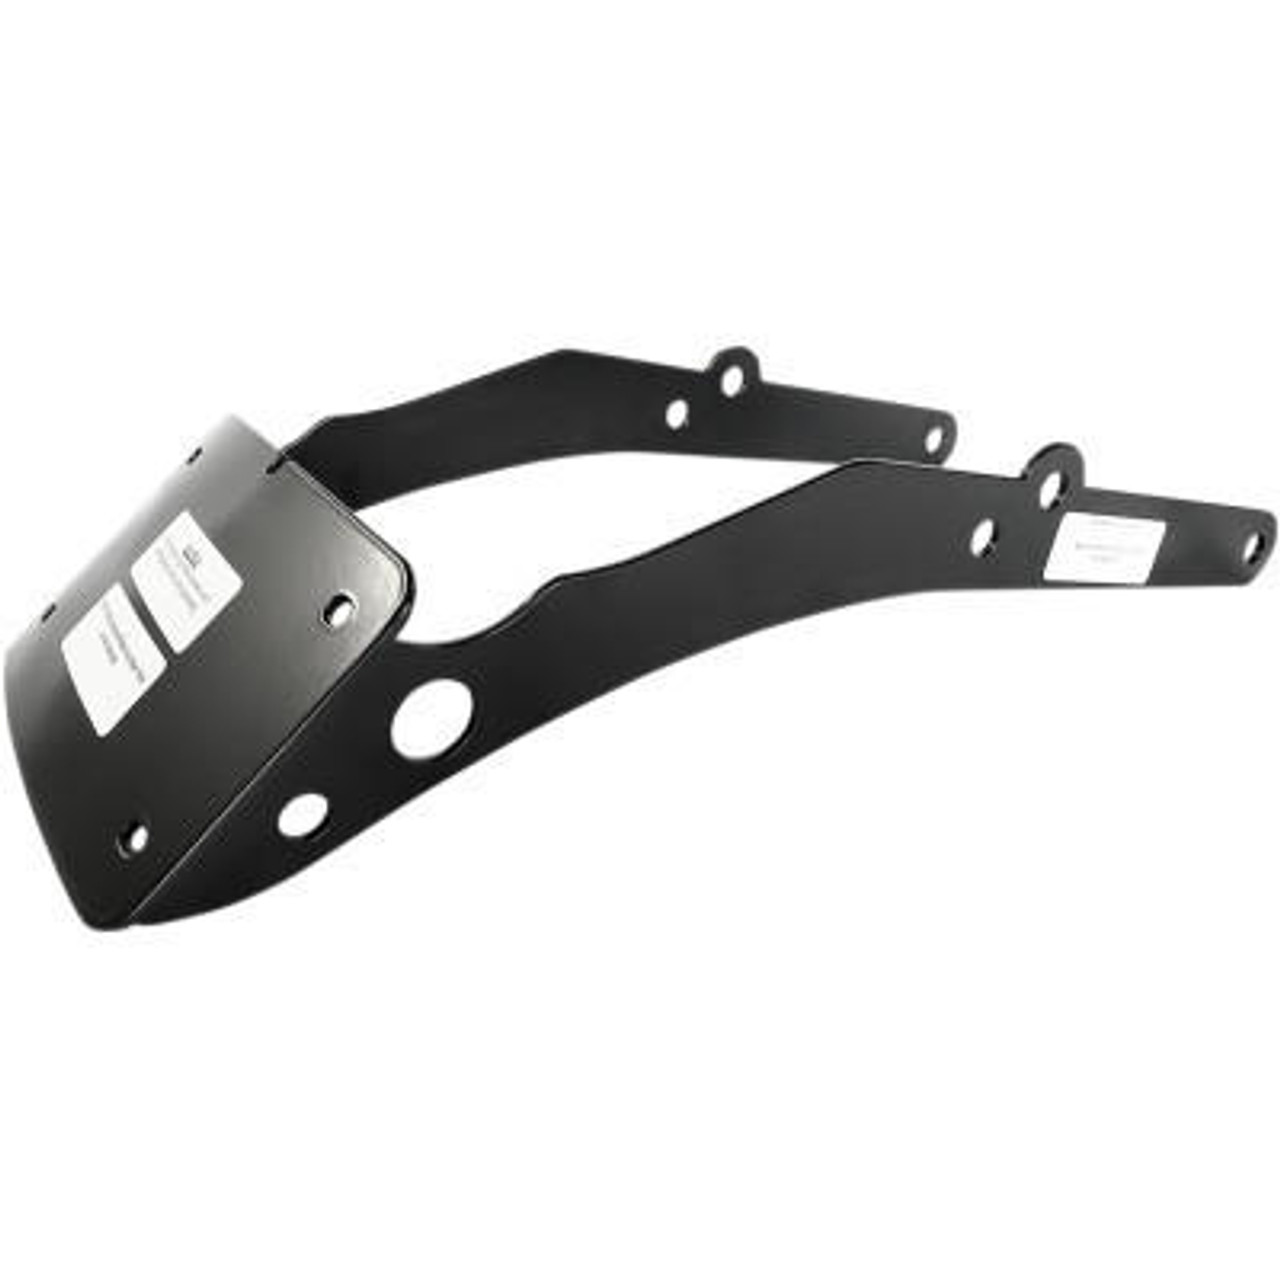 Cycle Visions Curved License Plate Mount